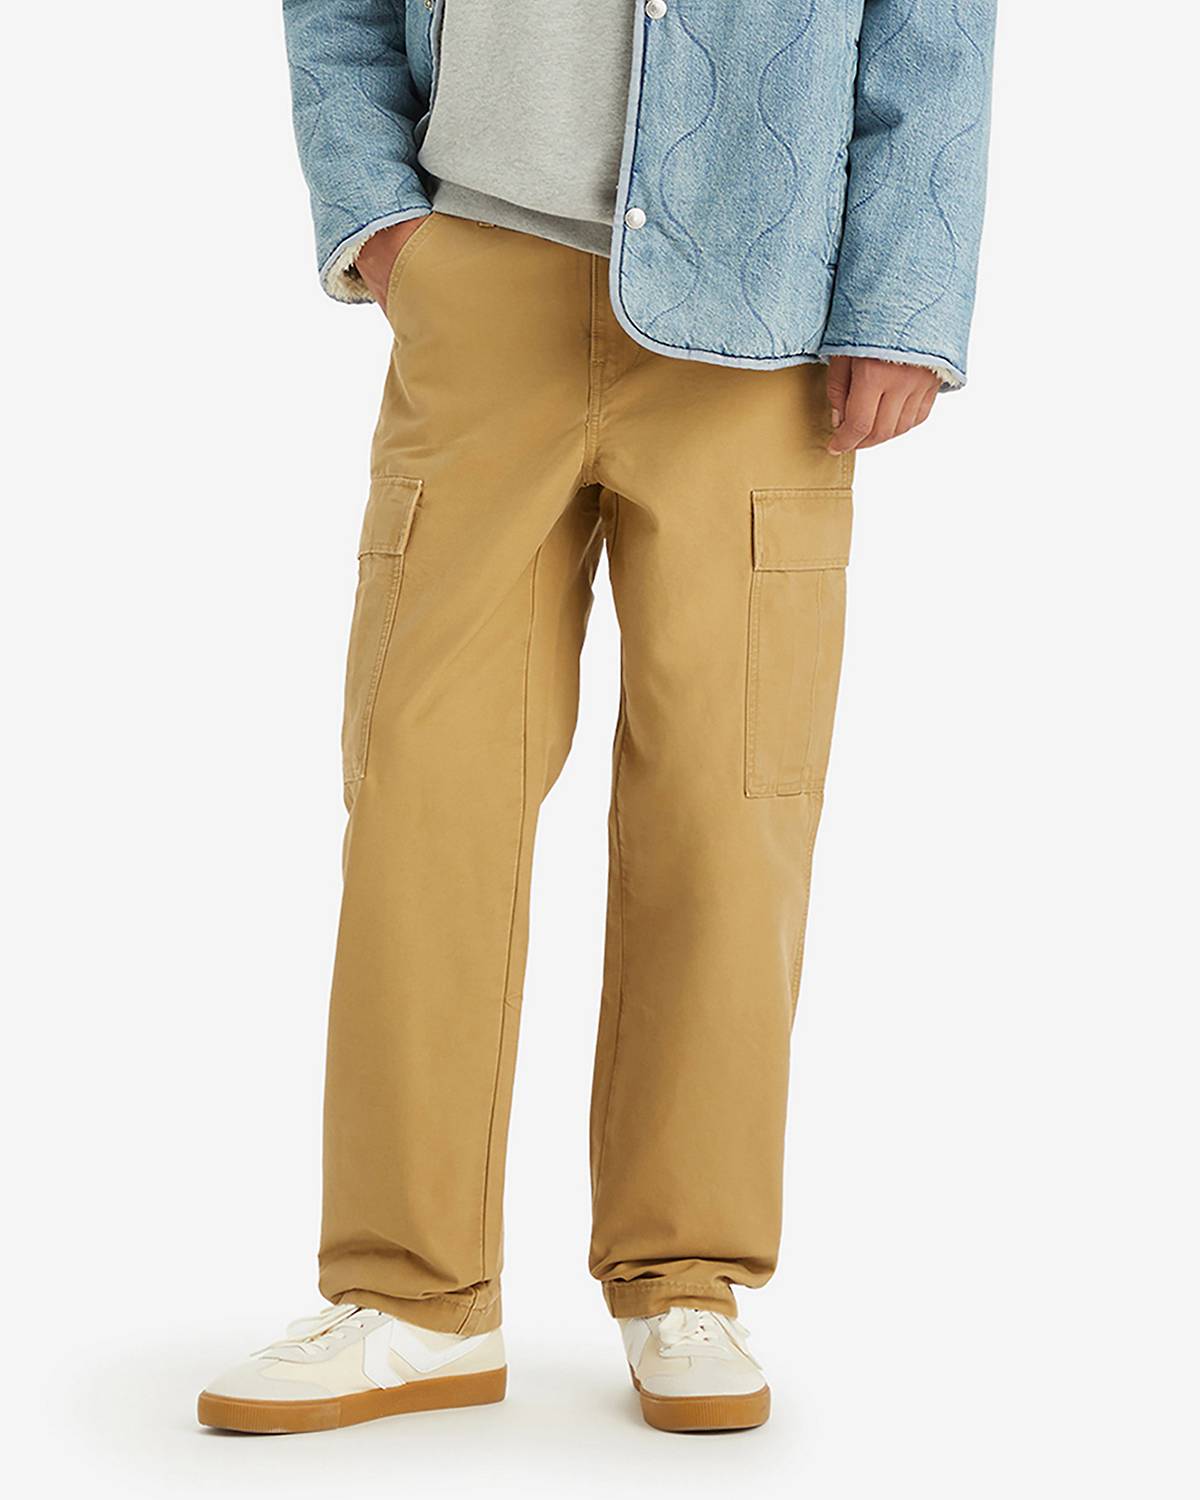 THE CARGO STRAIGHT TROUSERS - Ink blue